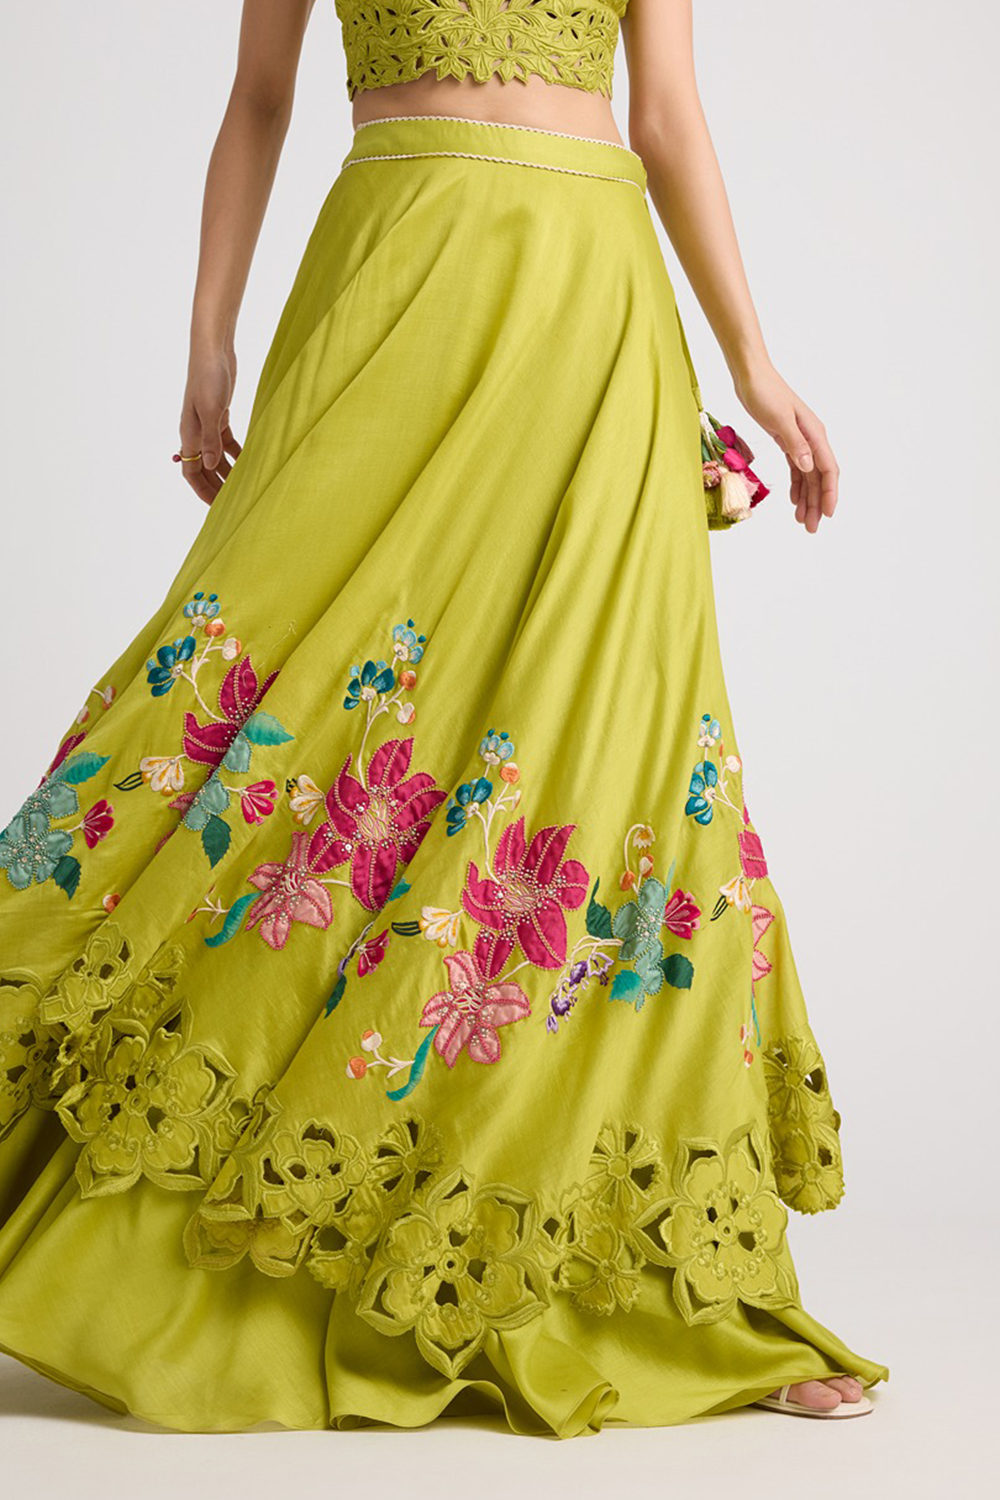 Lime Green Floral Applique Layered Lehenga